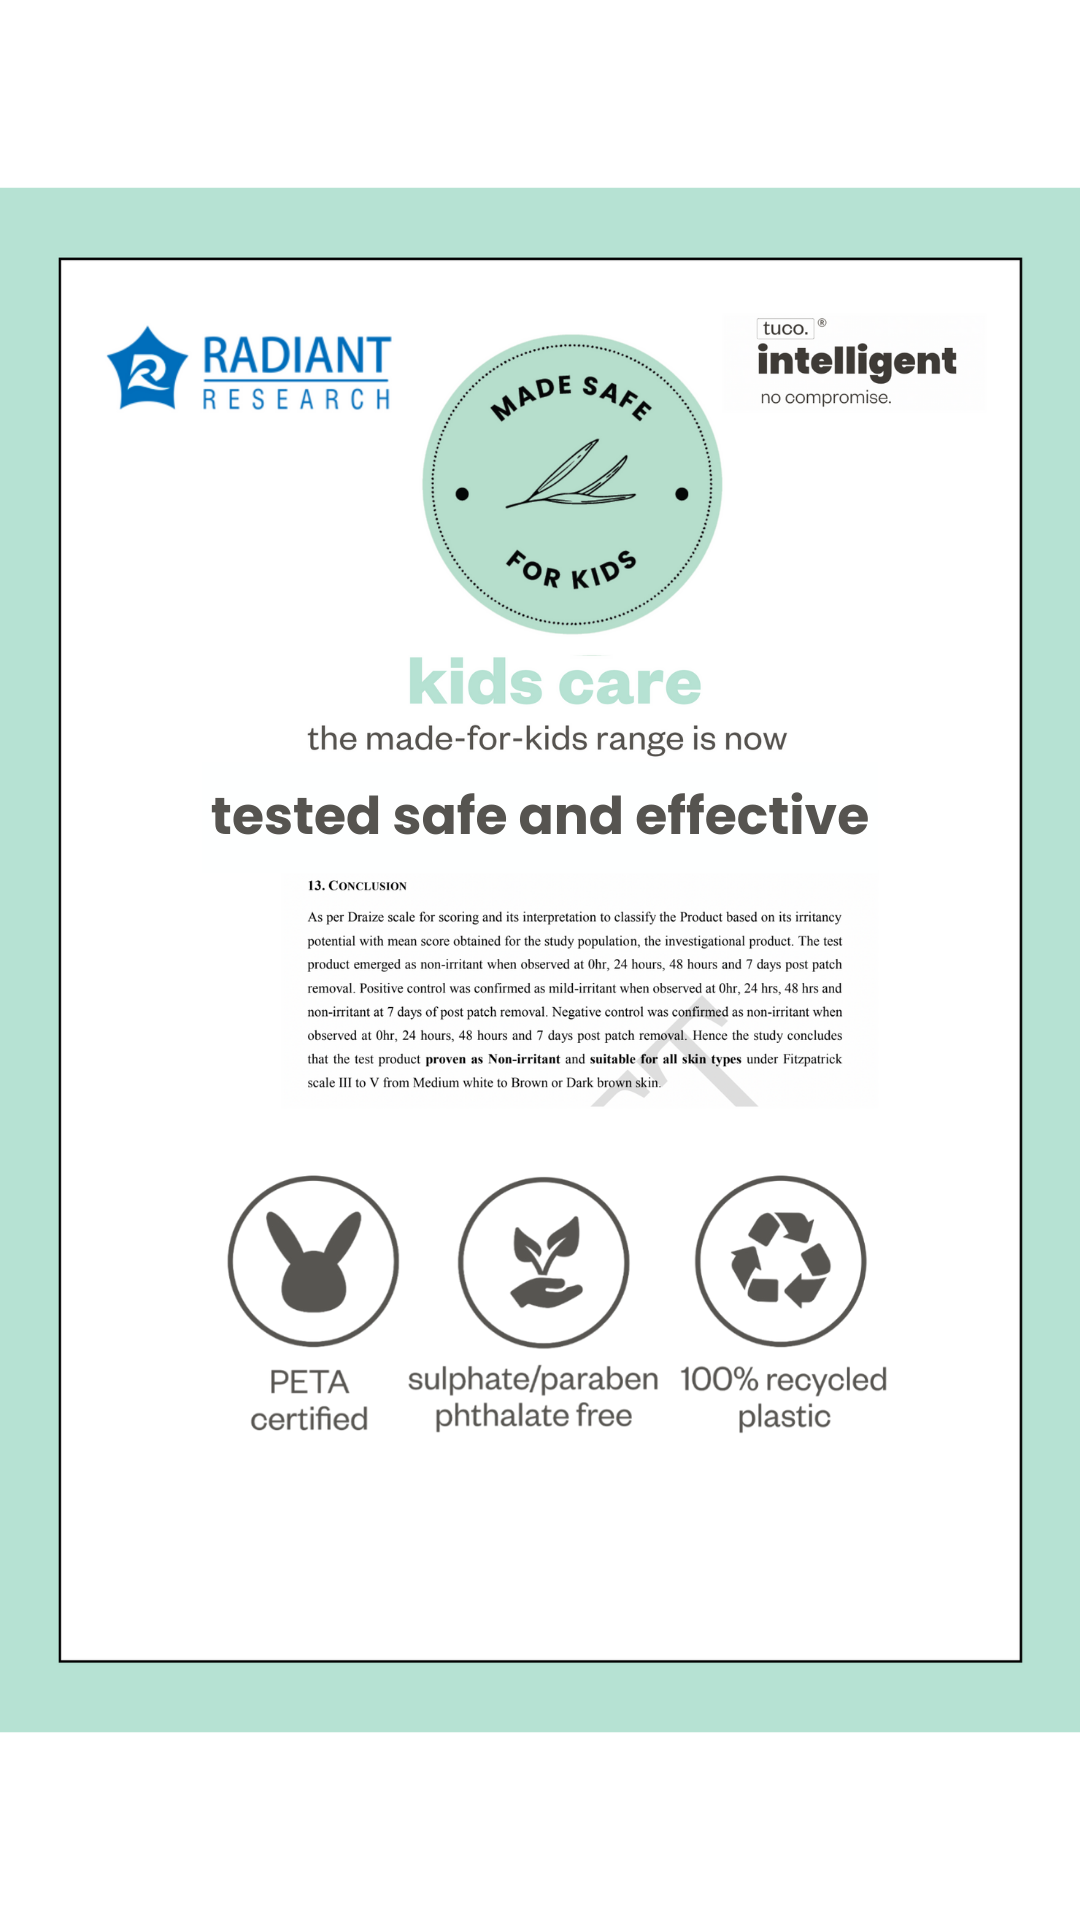 Tuco Intelligent Kids Dry Skin Magic Souffle - Moisturizing Cream with Neem Oil, Calendula Oil, and Turmeric Oil - 100ml - Effective for Skin Rash and Dry Skin - Gentle and Nourishing Formula for Kids - Dermatologically Tested and Safe for Delicate Skin